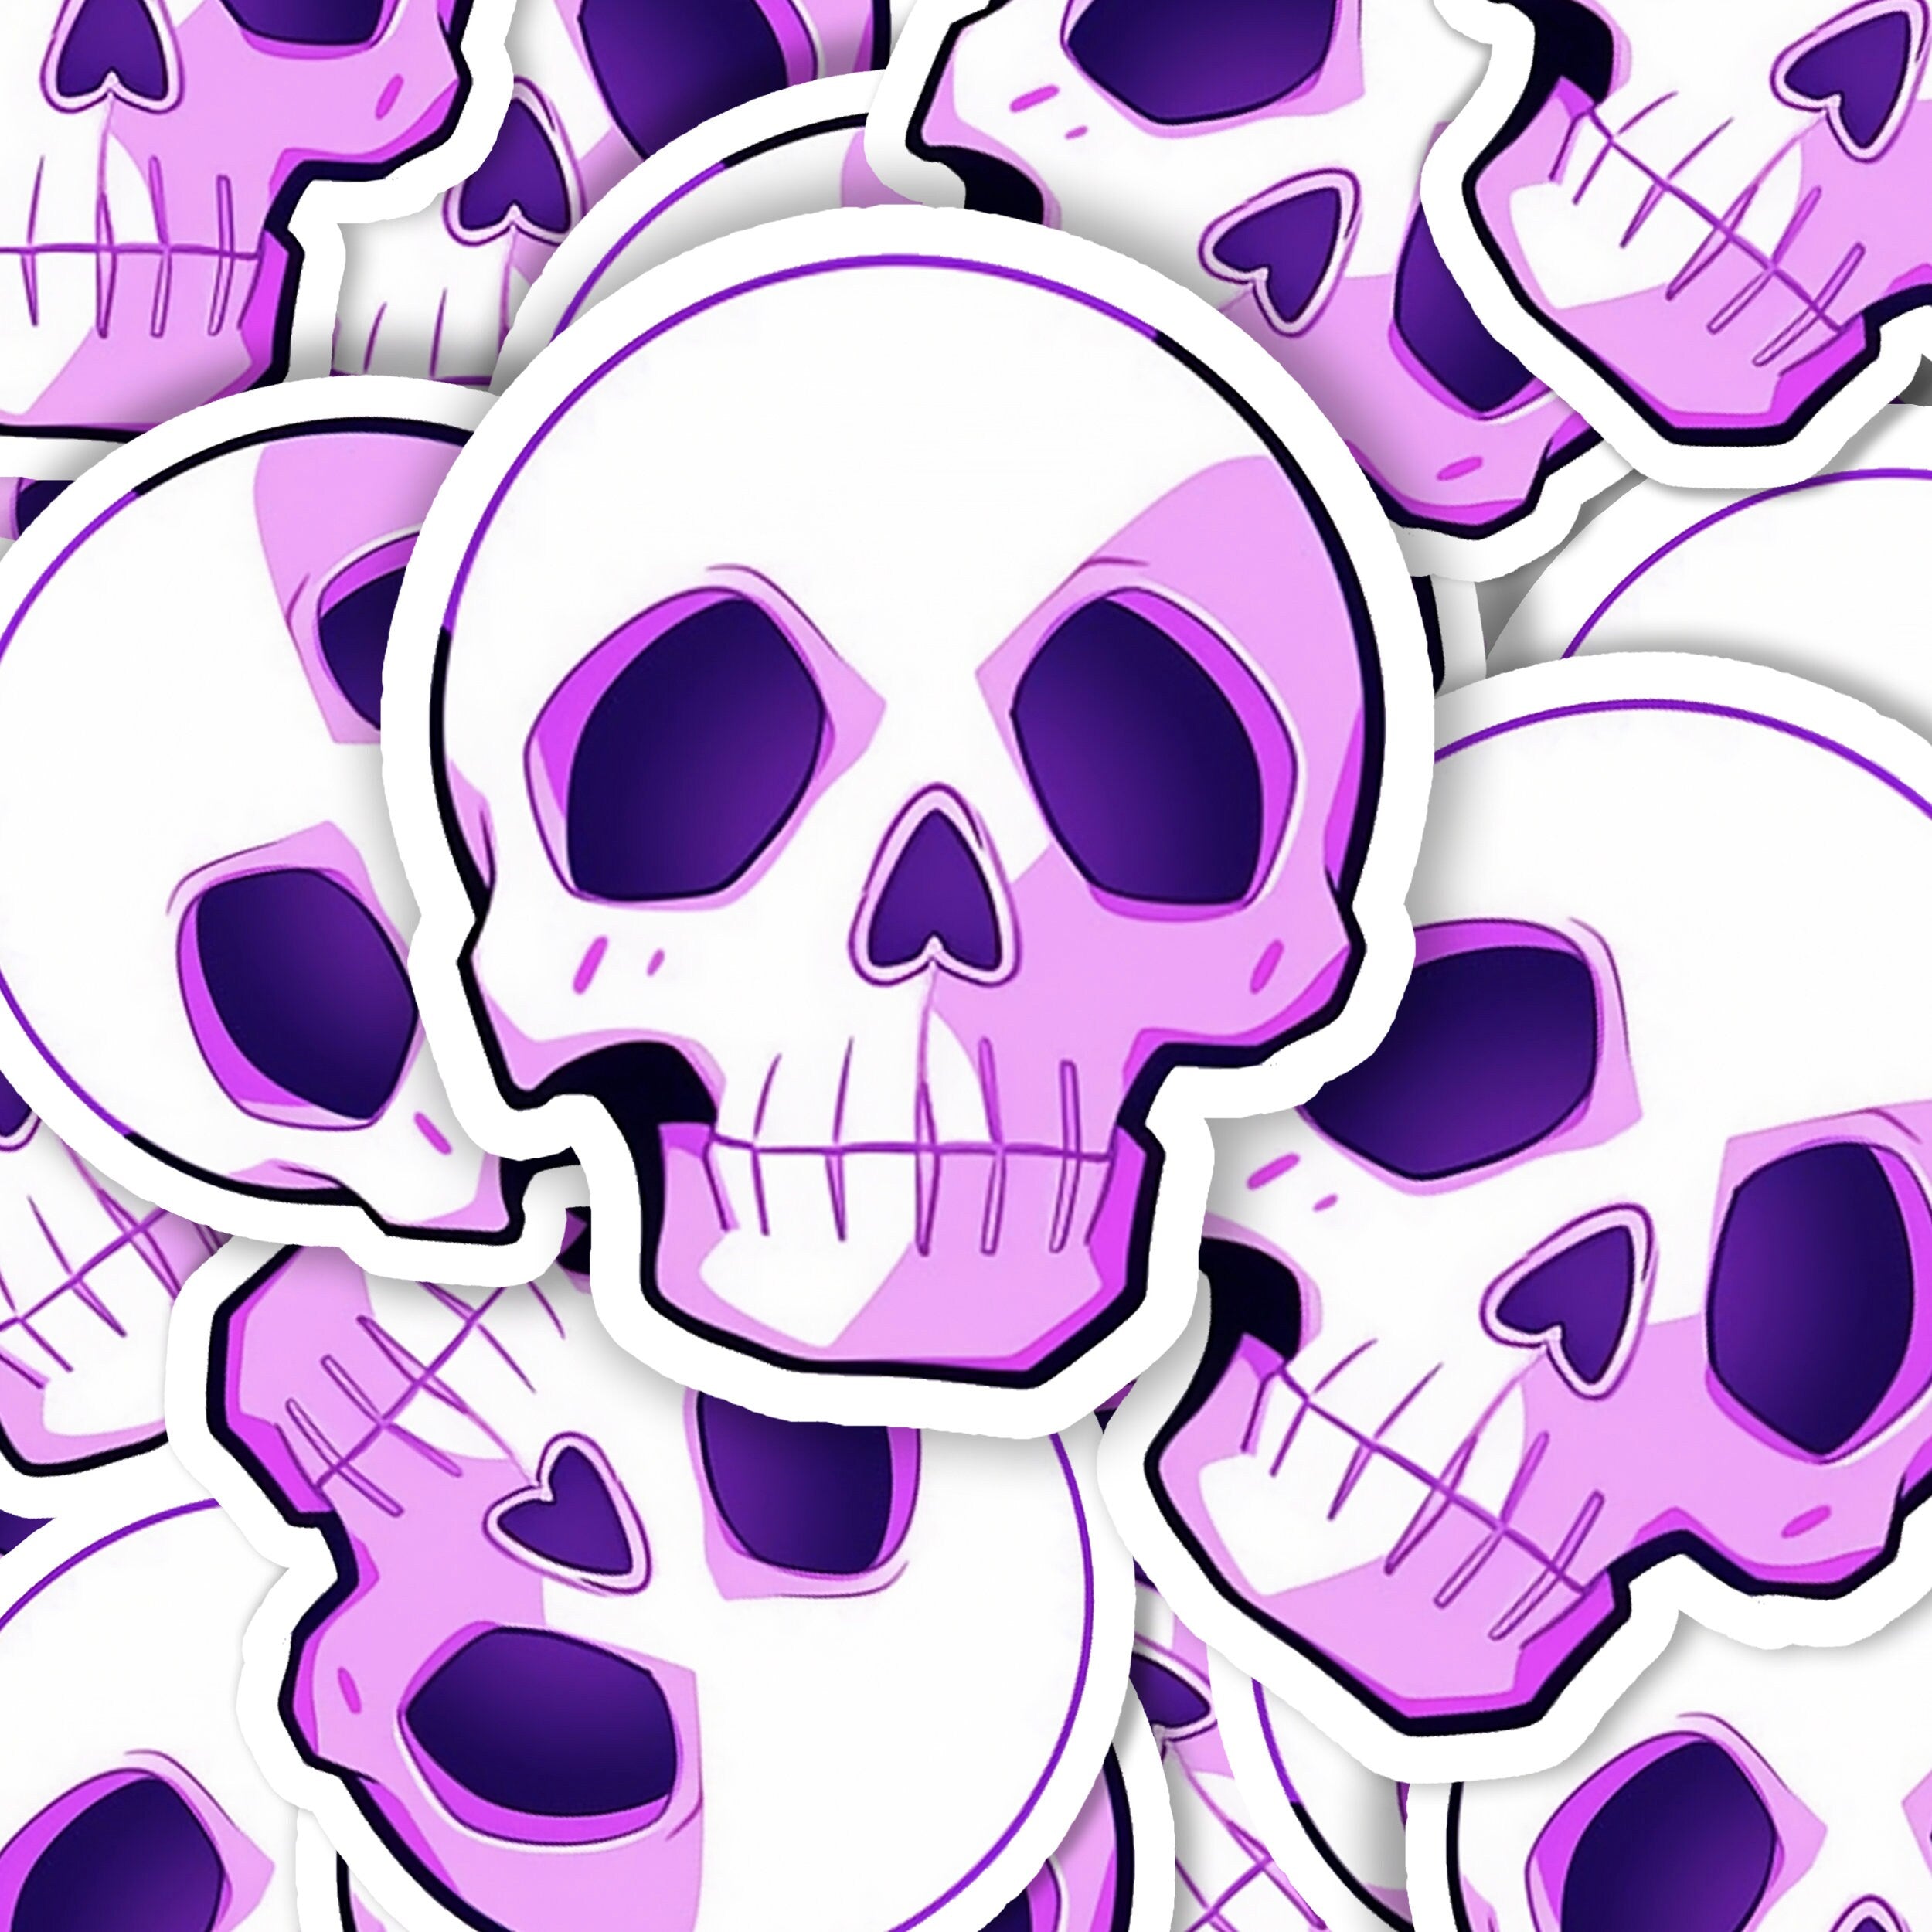 Skull Kawaii Sticker || Witchy Colorful Halloween Sticker, magic stickers, kindle stickers, laptop decal, vinyl sticker, pastel goth spooky